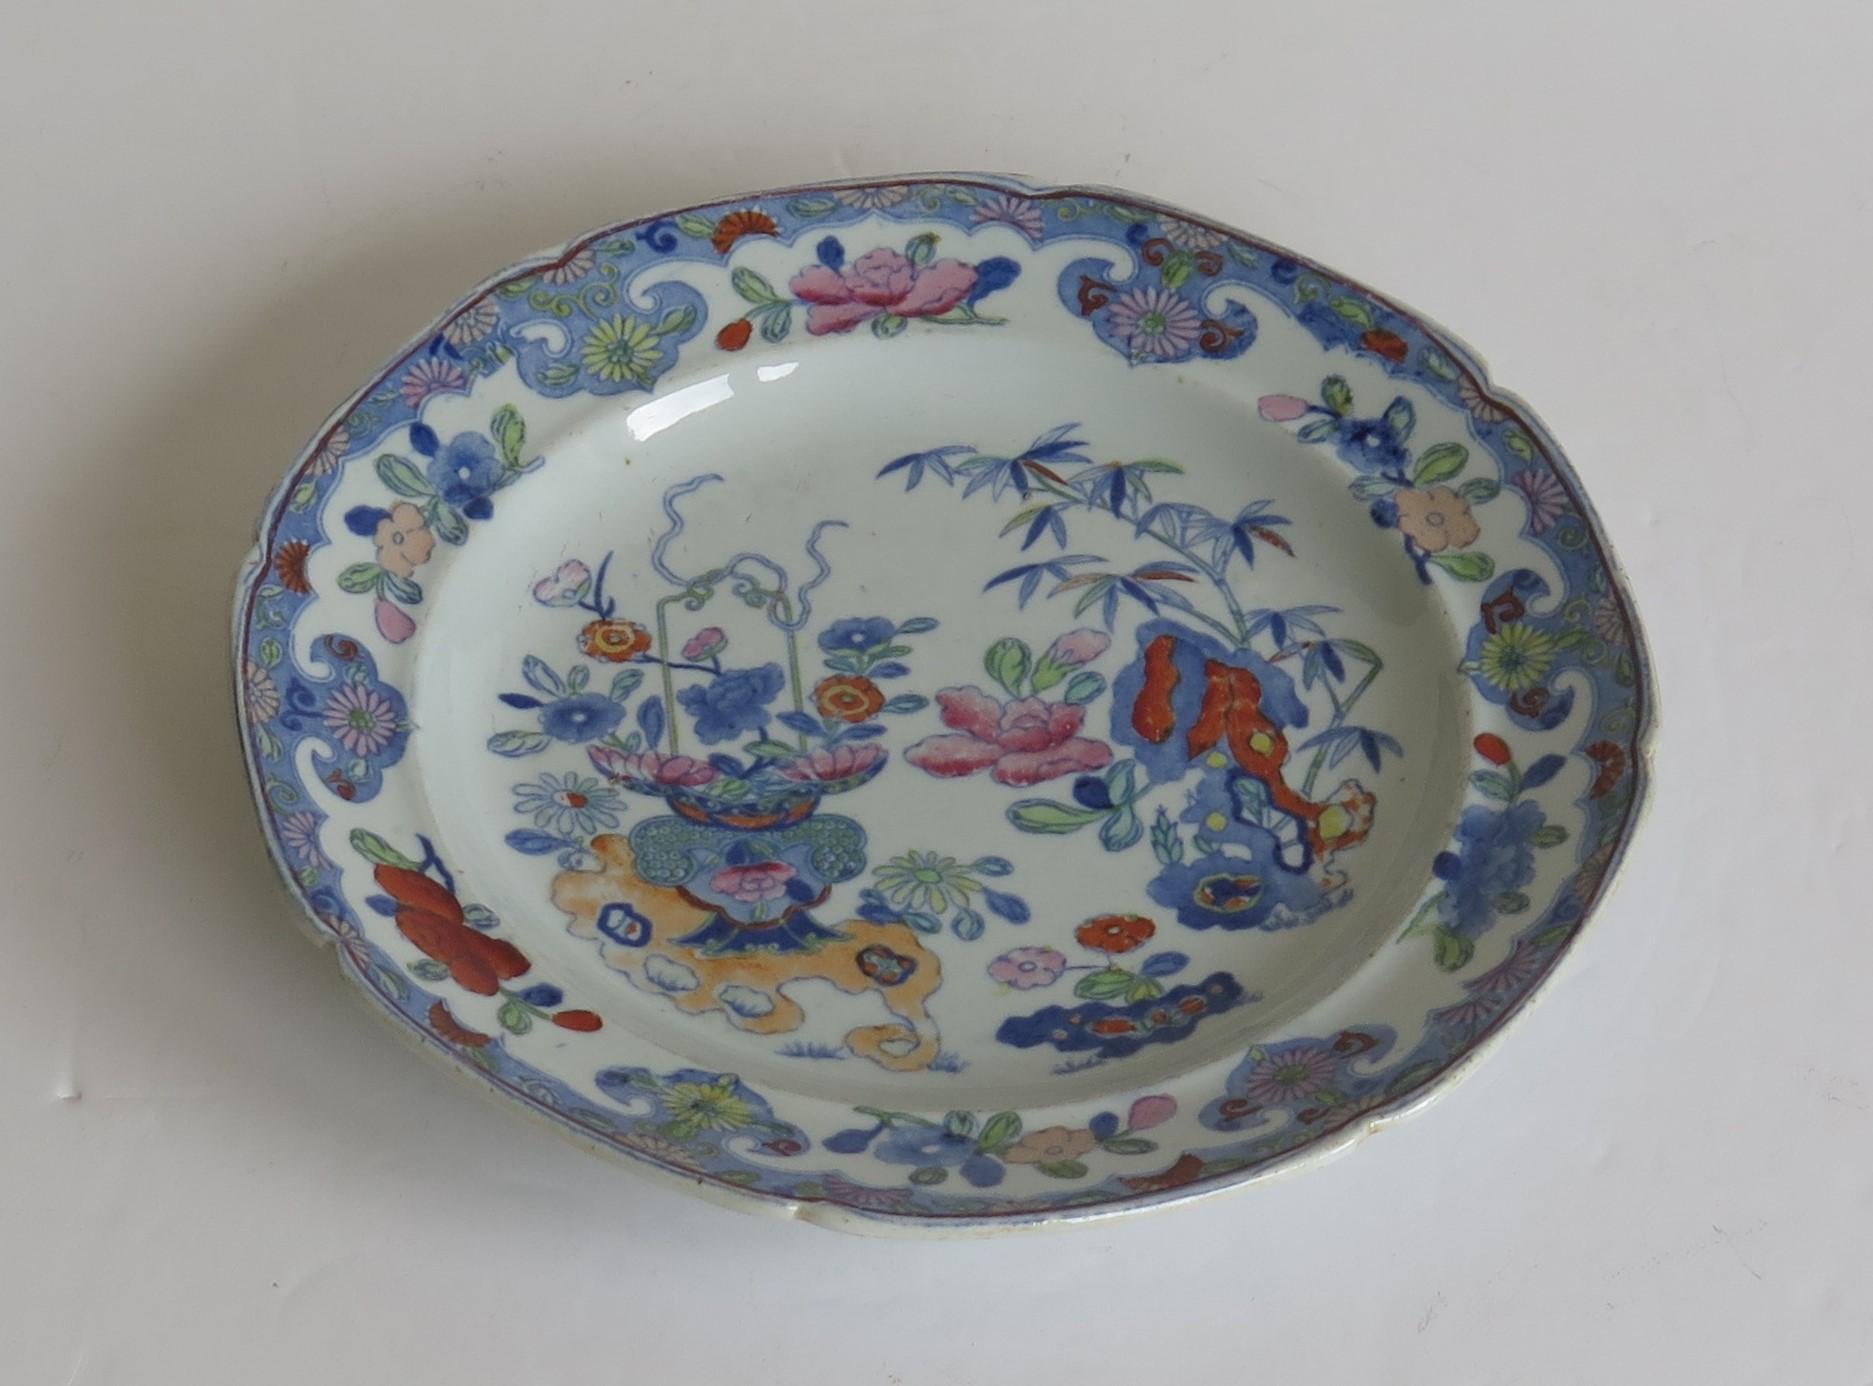 This is a very decorative dish or plate by Mason's Ironstone, Lane Delph, England in the Bamboo and Basket pattern, dating to the early 19th century, Georgian period, circa 1813-1820.

The plate or dish is fairly deep and circular in shape with a